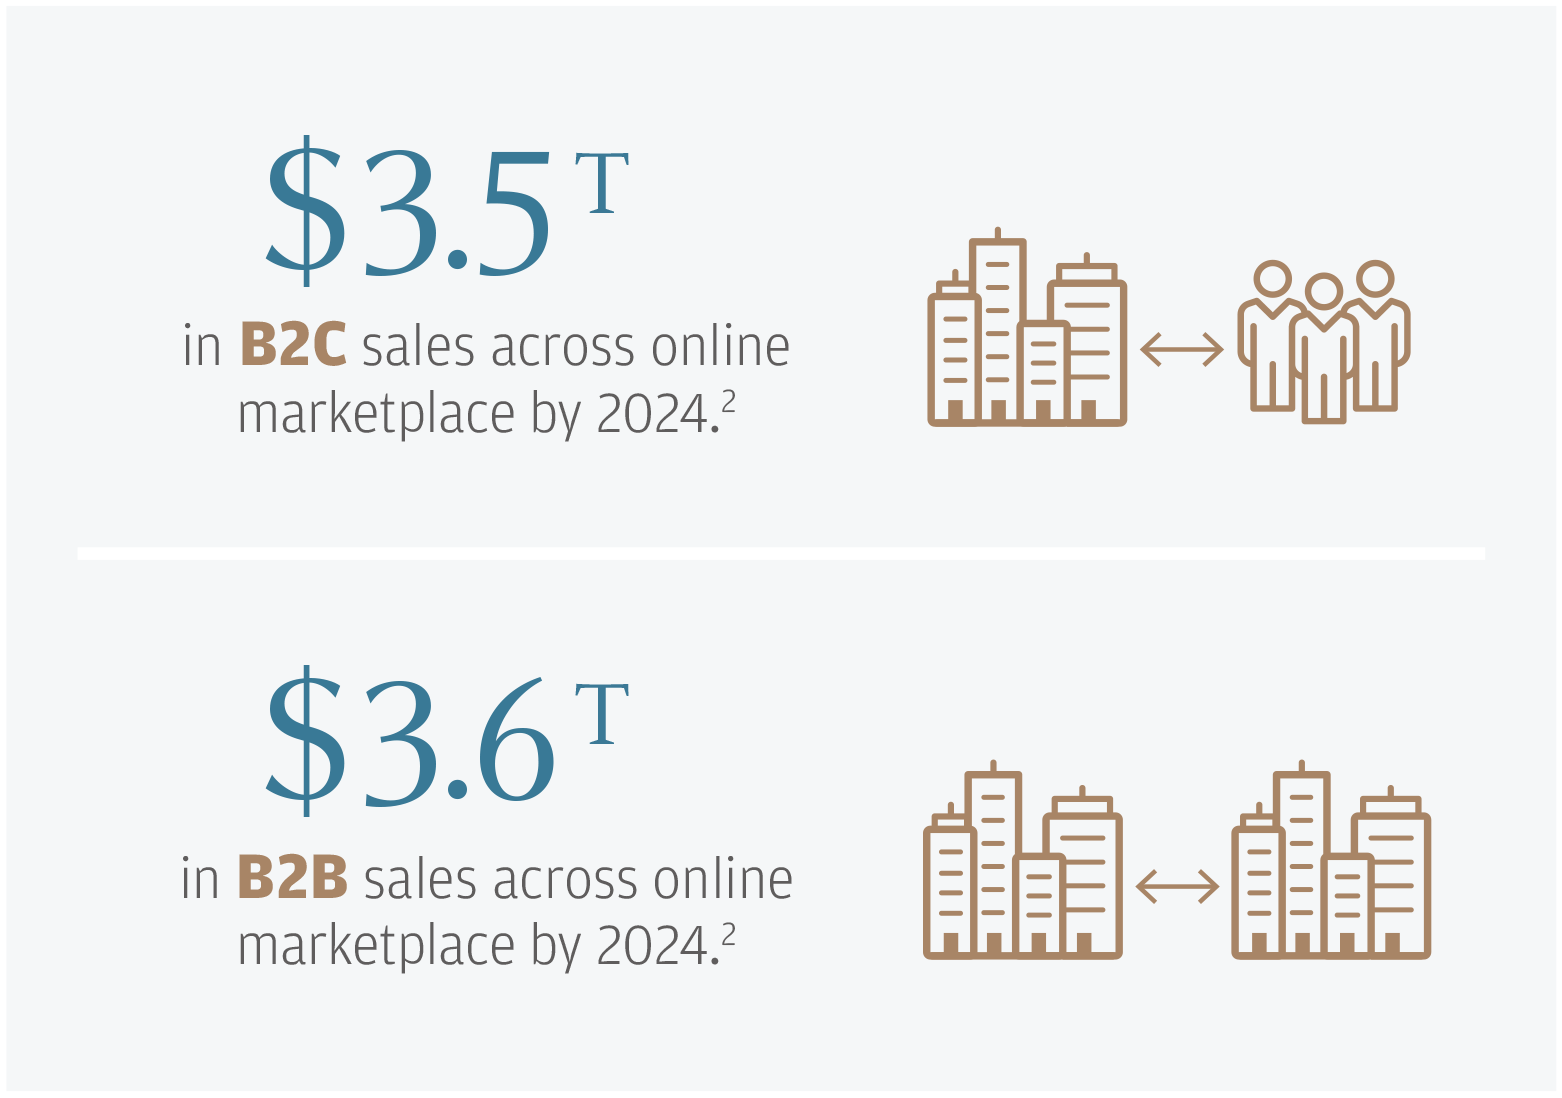 B2C sales across online marketplaces by 2024